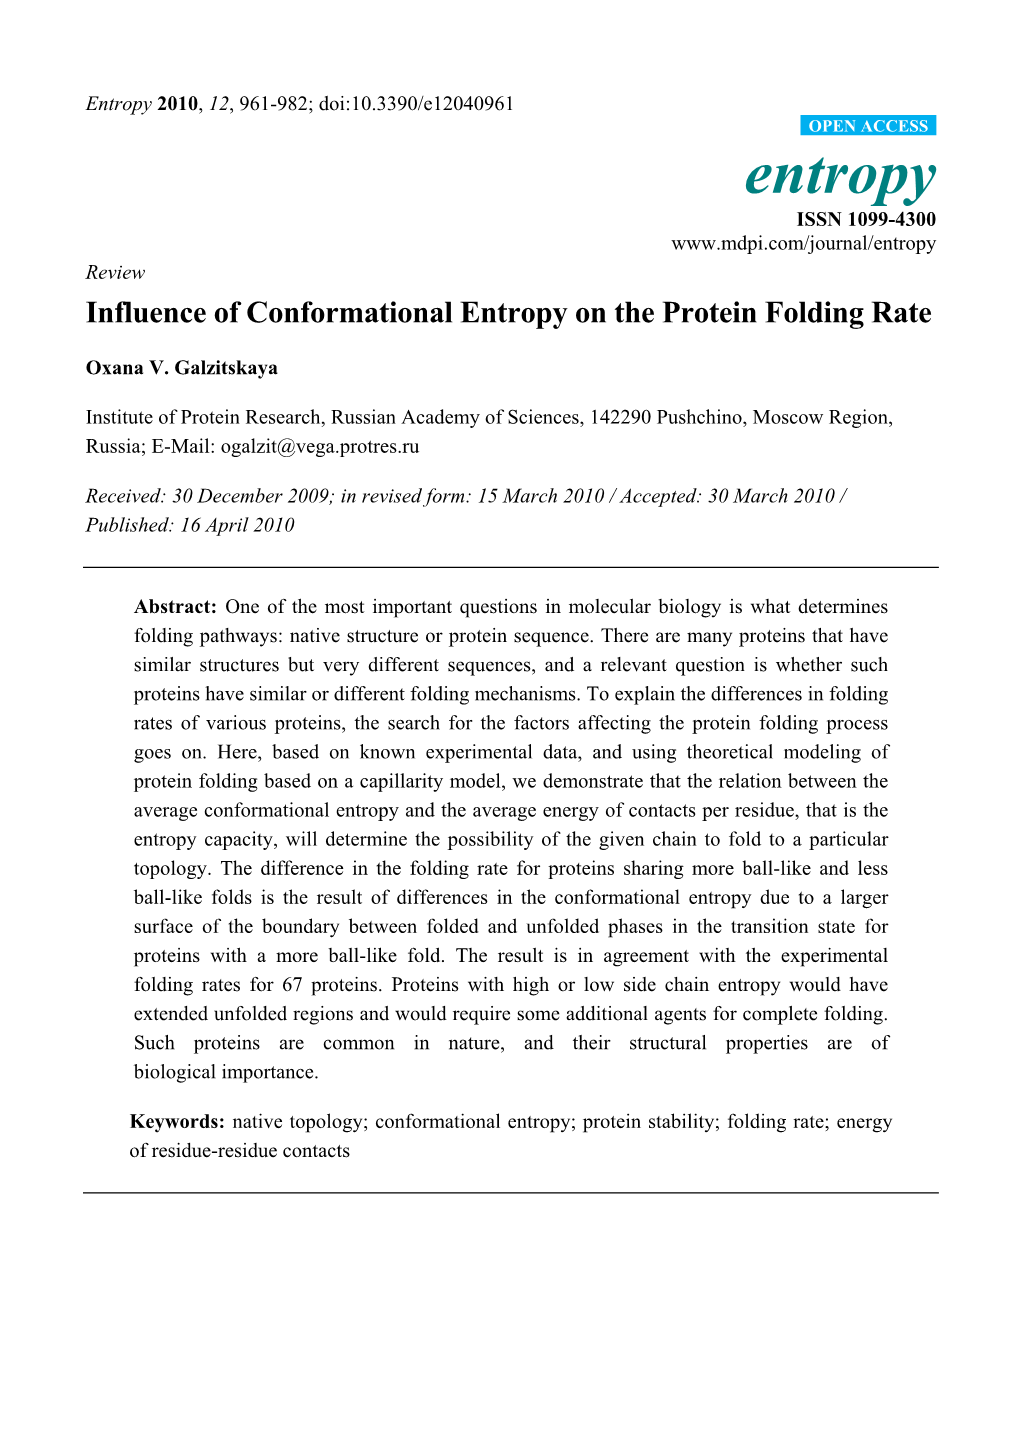 Influence of Conformational Entropy on the Protein Folding Rate